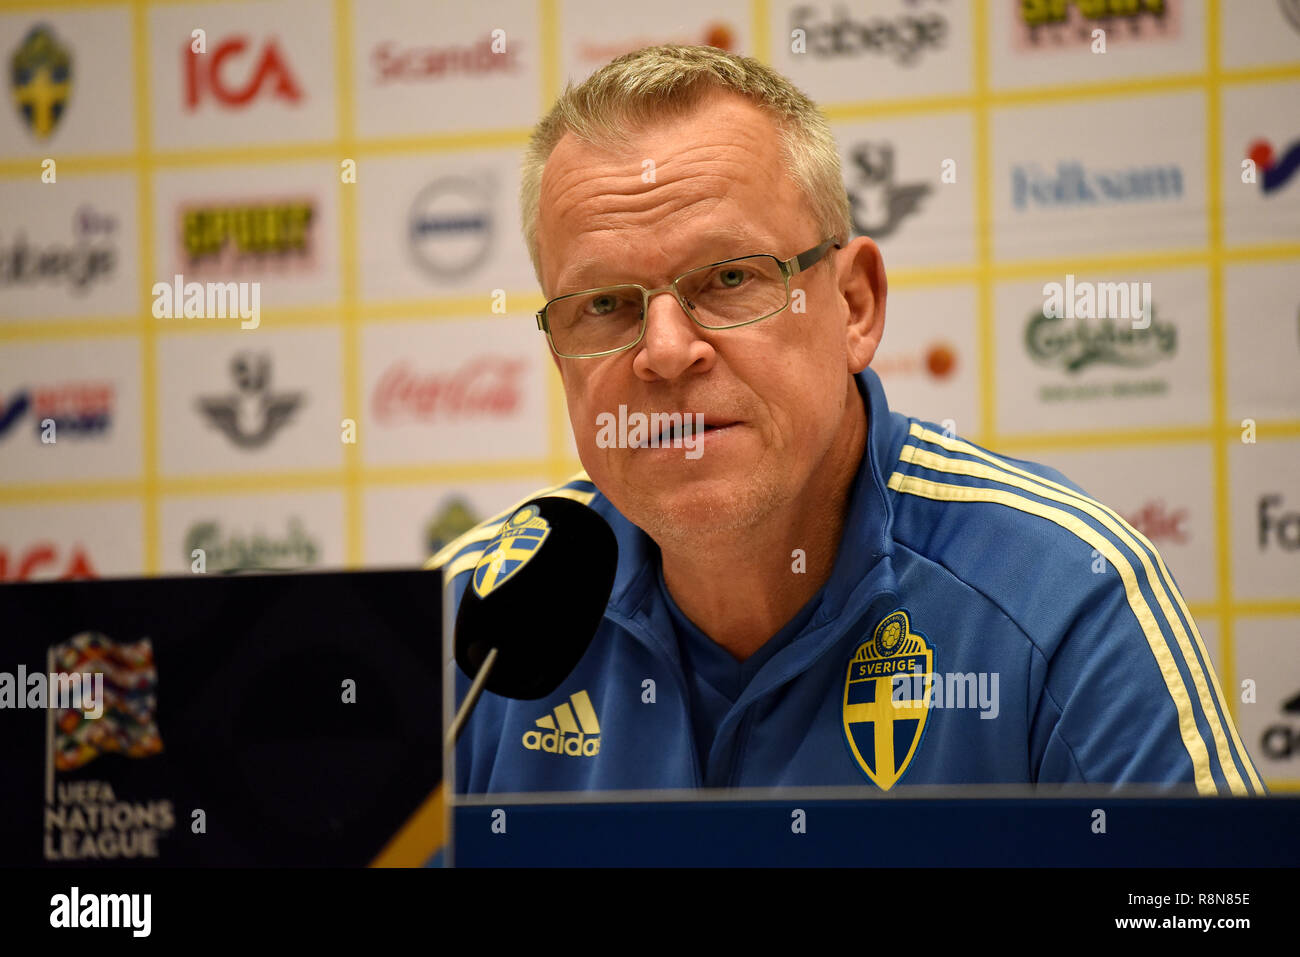 Solna, Sweden - November 20, 2018. Sweden national team coach Jan Andersson after UEFA Nations League match Sweden vs Russia in Solna. Stock Photo